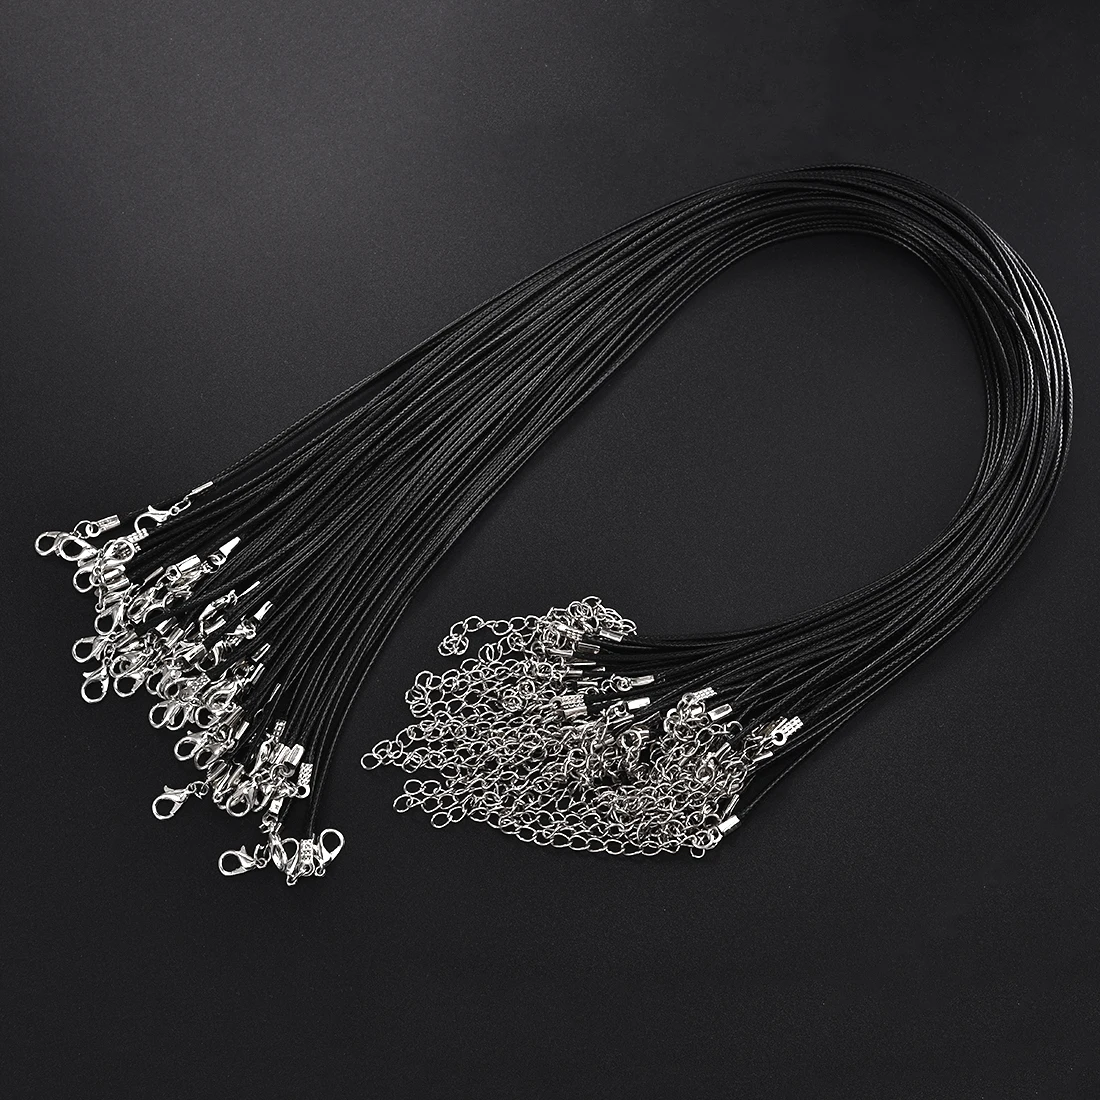 2mm Black Leather Cord Necklace with Sterling Silver Lobster Clasp | Available Lengths 12 - 30